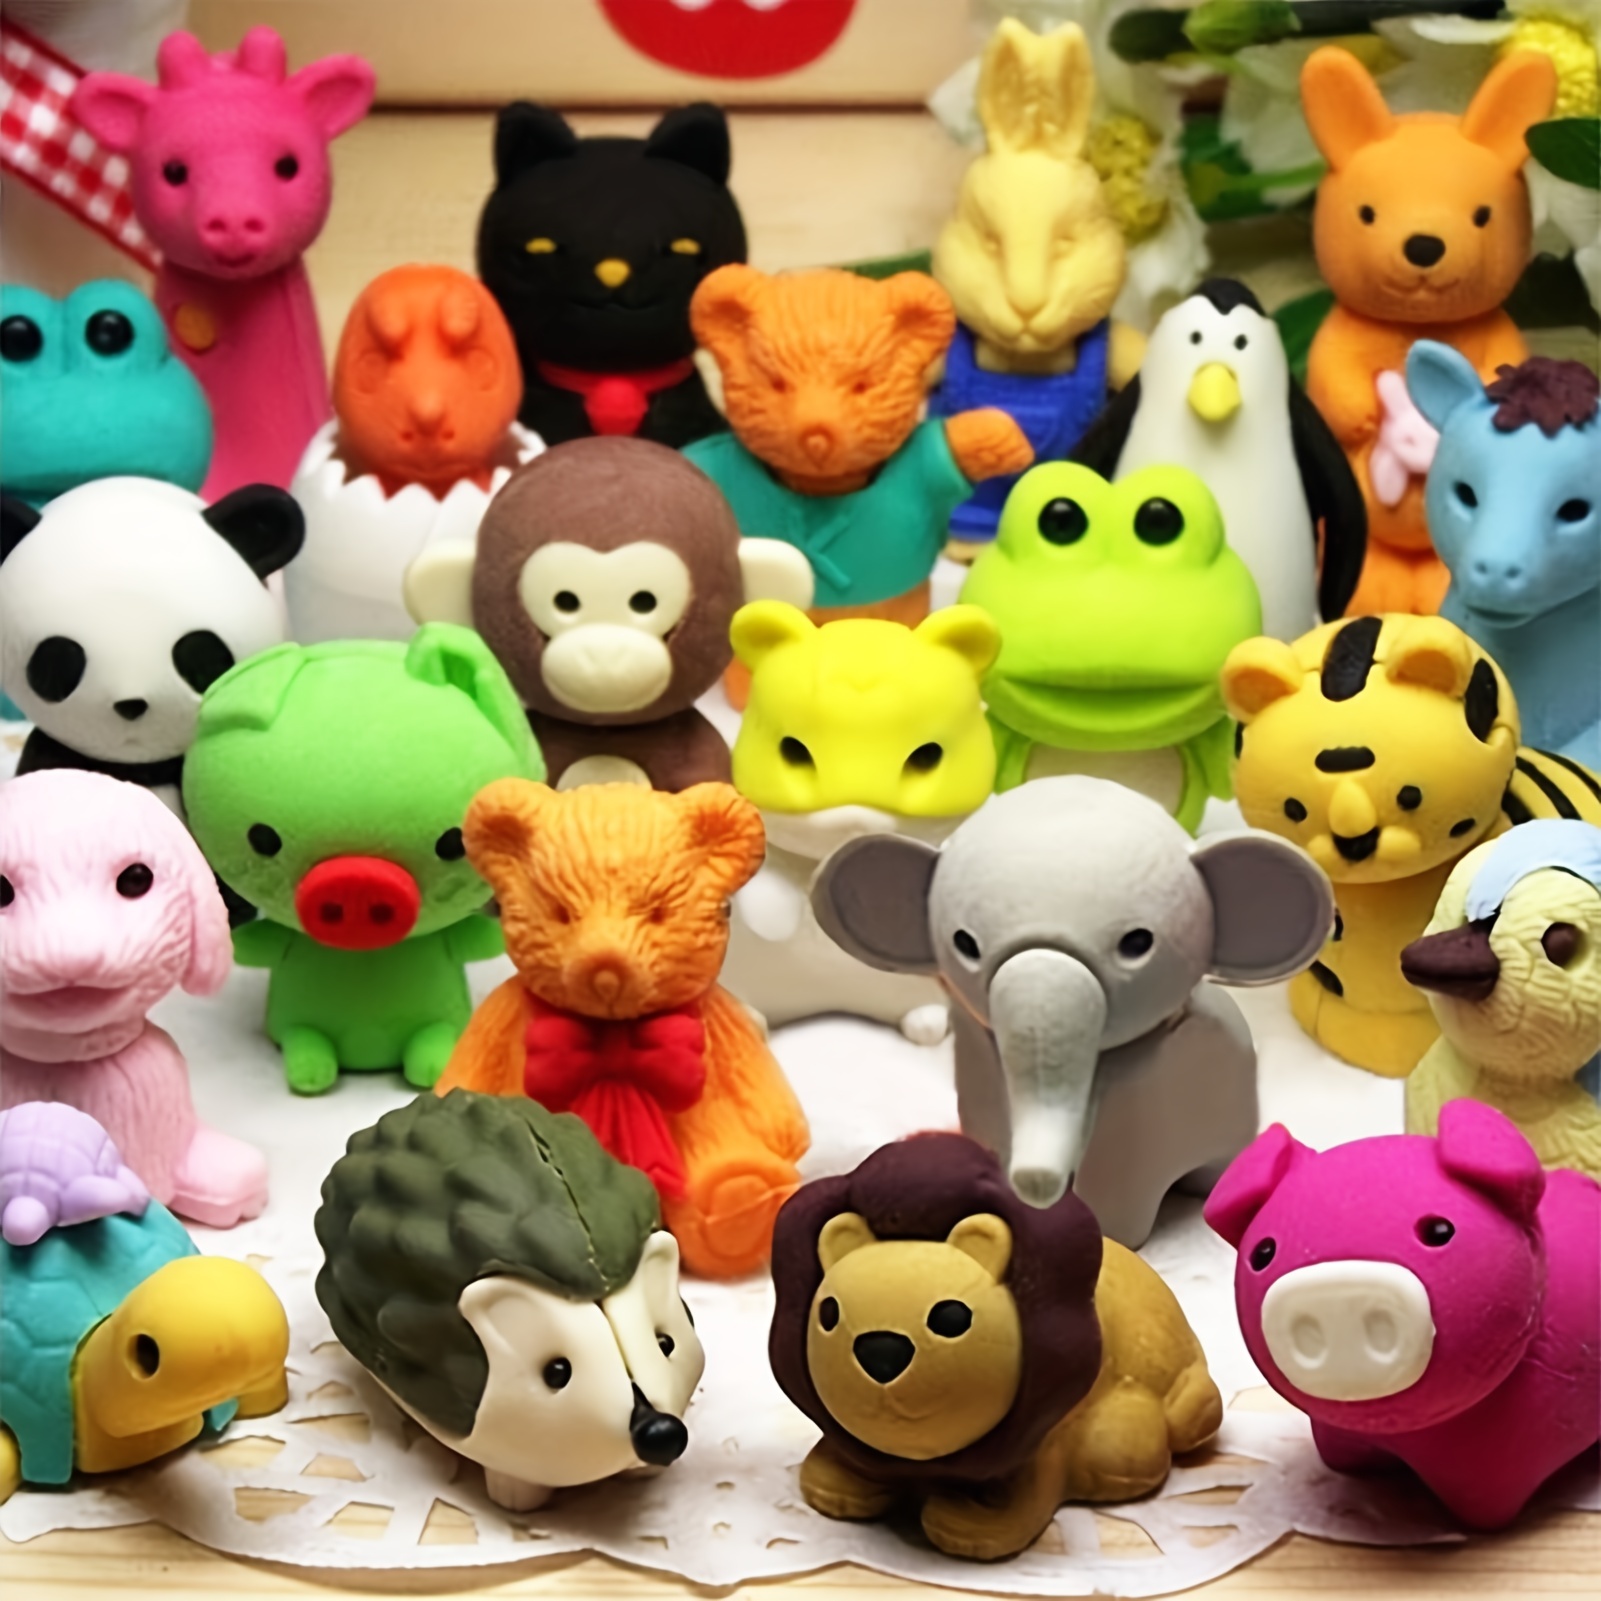 140 Pcs Animal Erasers for Kids, Random Color, as Classroom Prizes Box  Rewards, Birthday Party Favor Supplies.A Must Fun for Kids! Buy 3D Mini  erasers